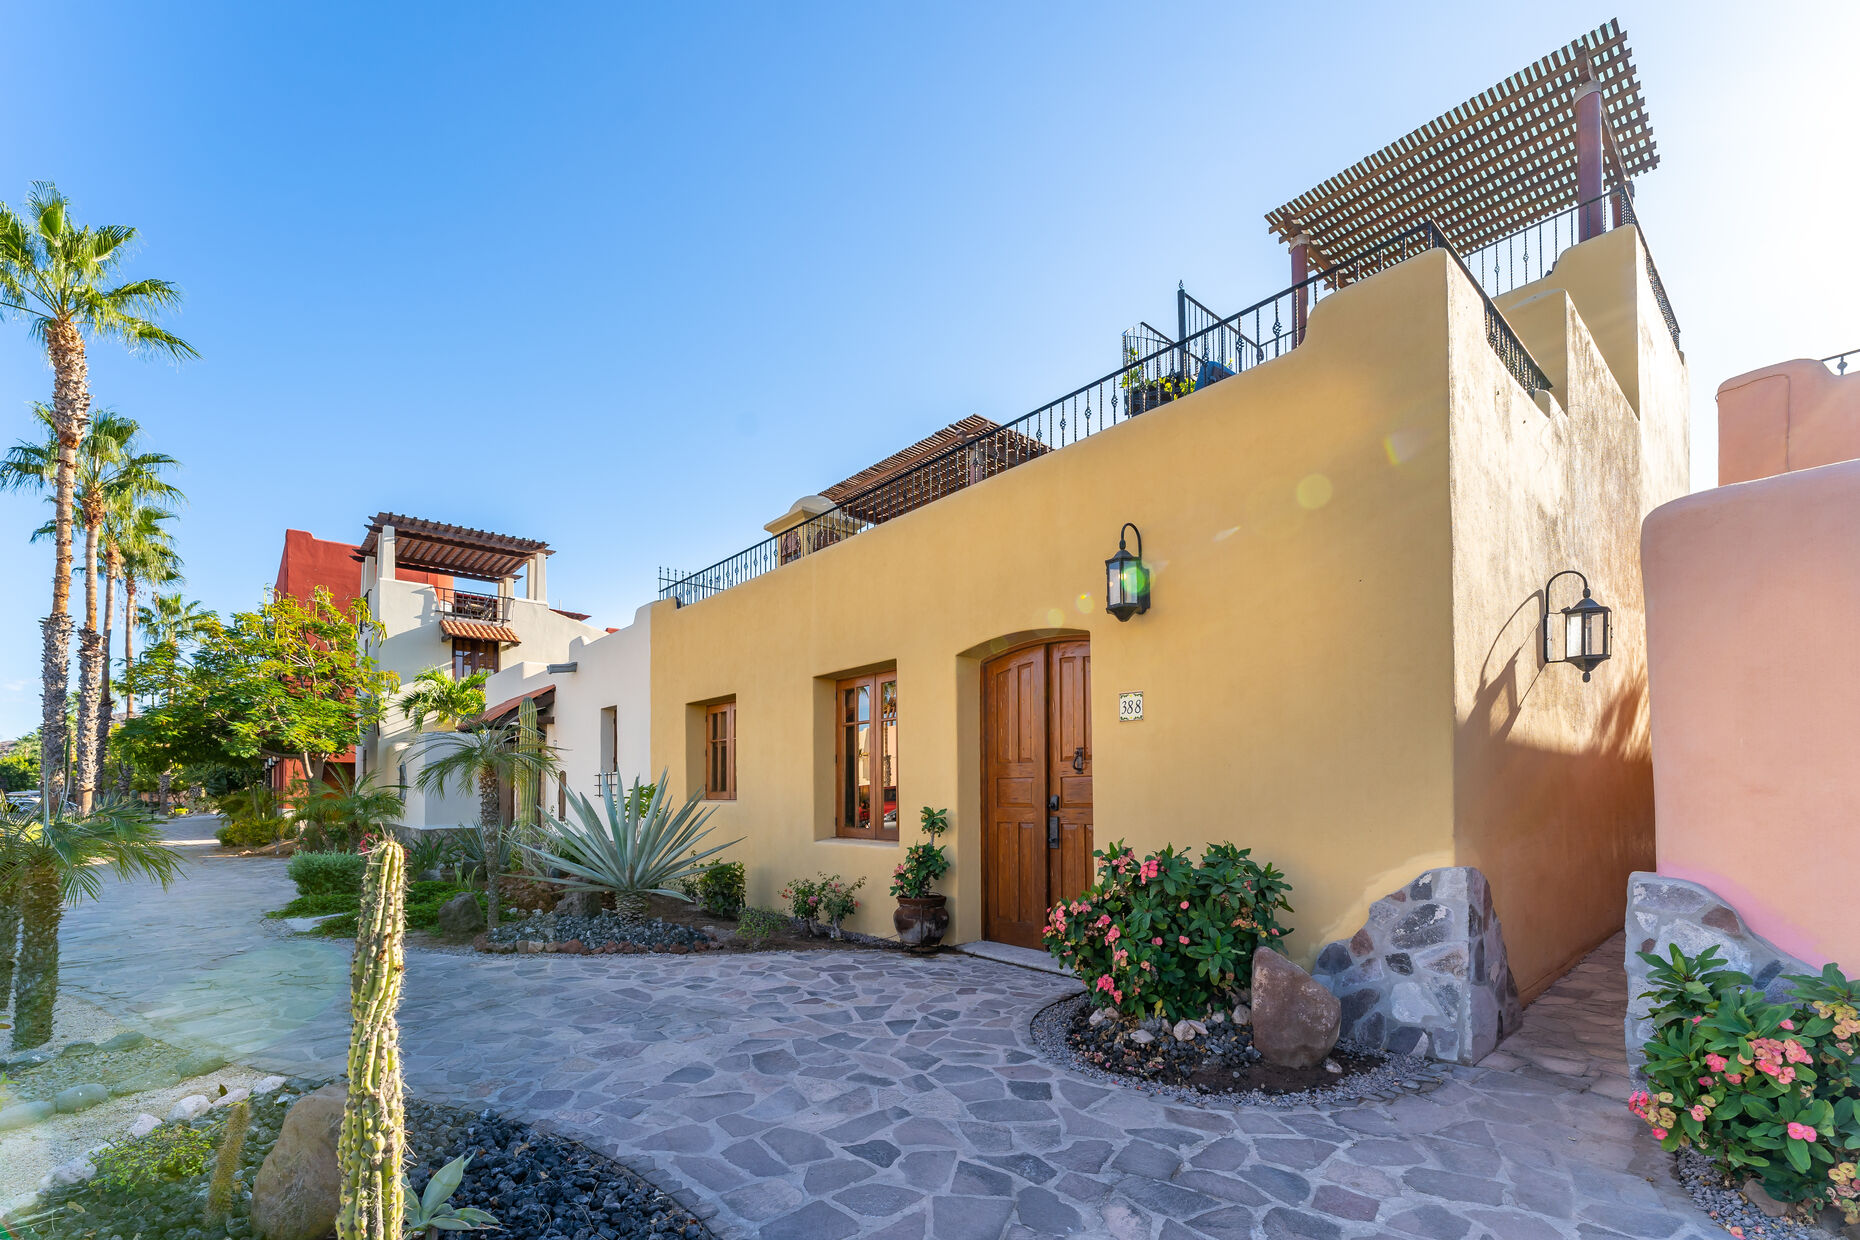 2 BD & 2 BR Casa. 2 minutes' walk to the community pool, restaurants, and the Beach of Loreto Bay